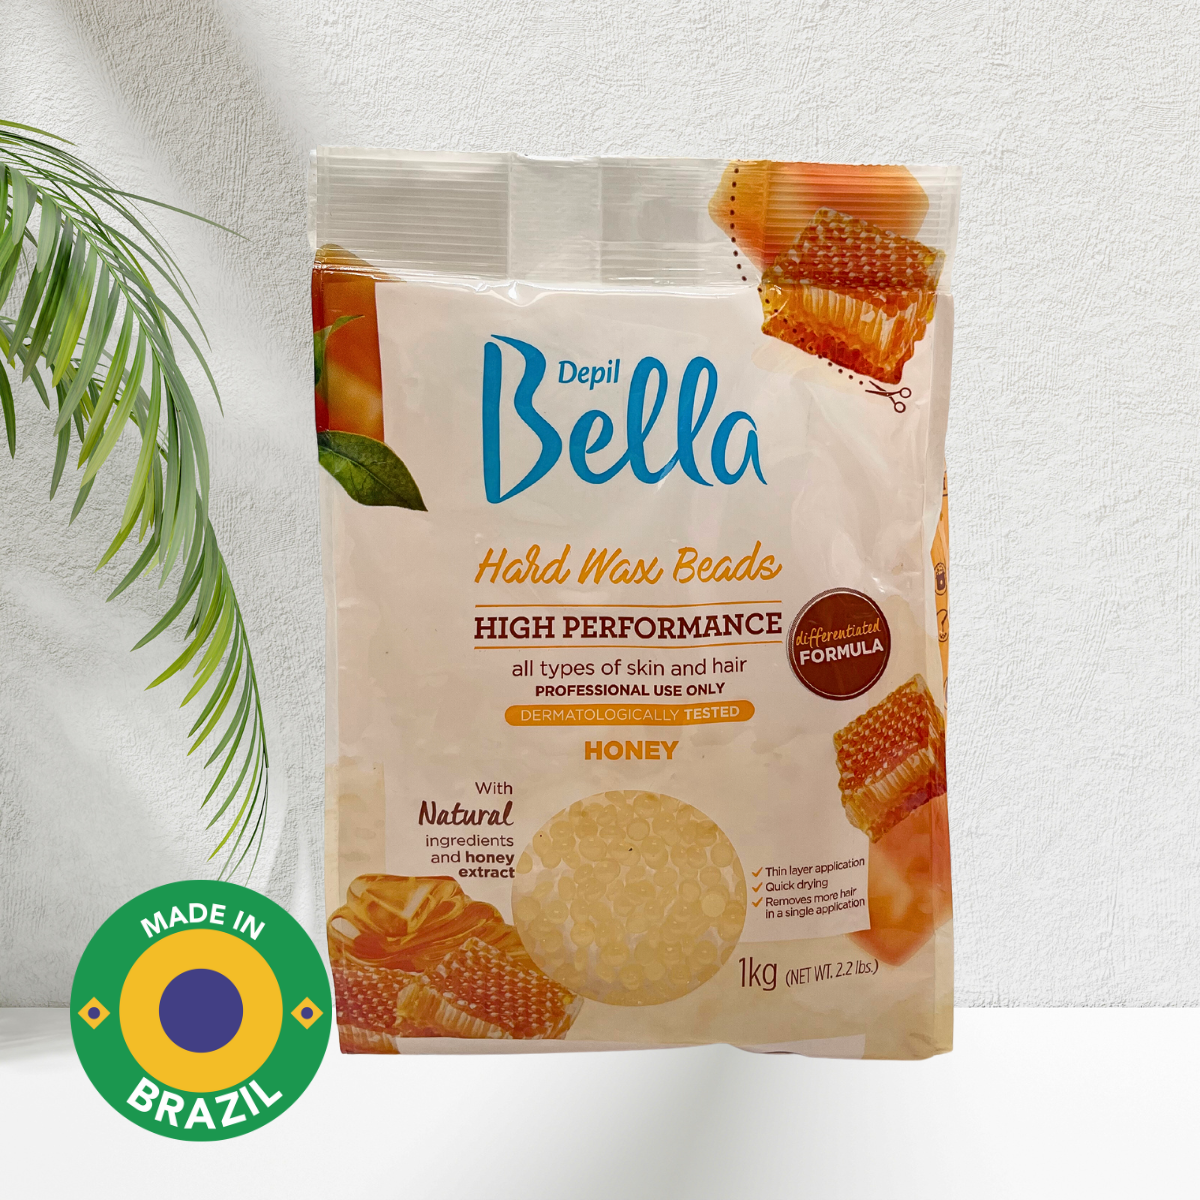 Depil Bella Honey wax application for smooth and hair-free skin with Depil Bella.